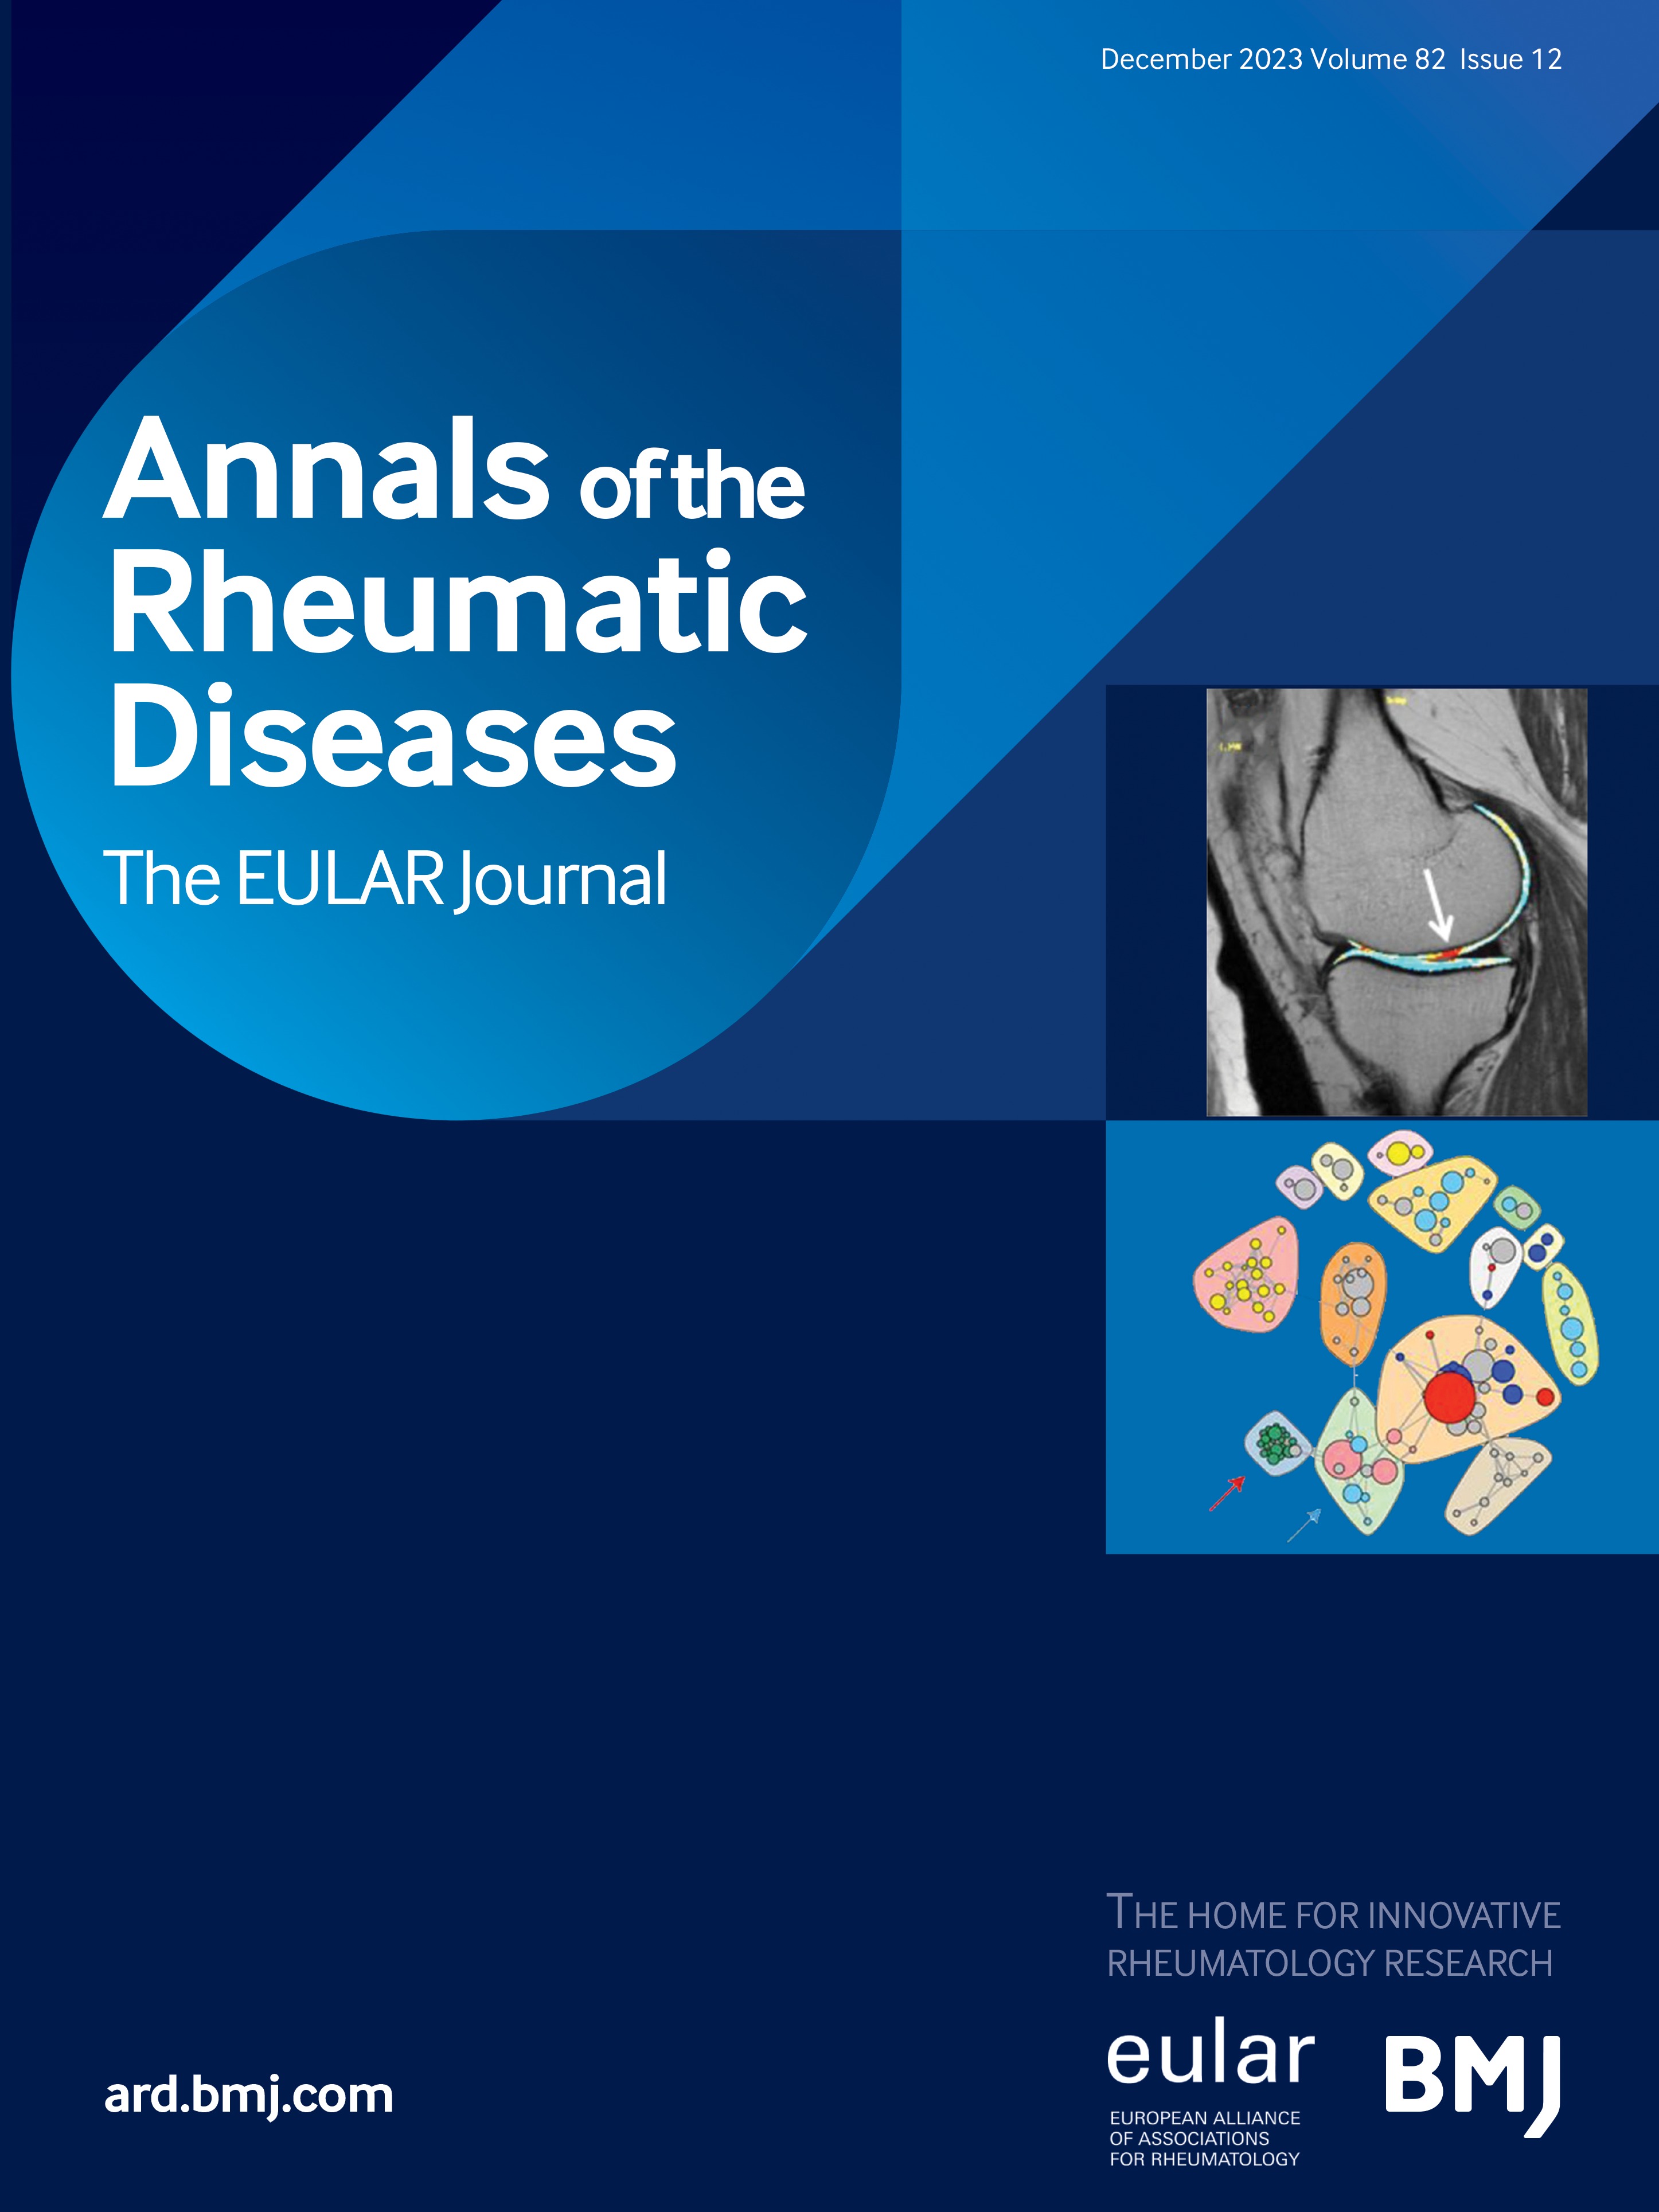 Correspondence on 'The 2019 American College of Rheumatology/European League Against Rheumatism classification criteria for IgG4-related disease by Wallace et al